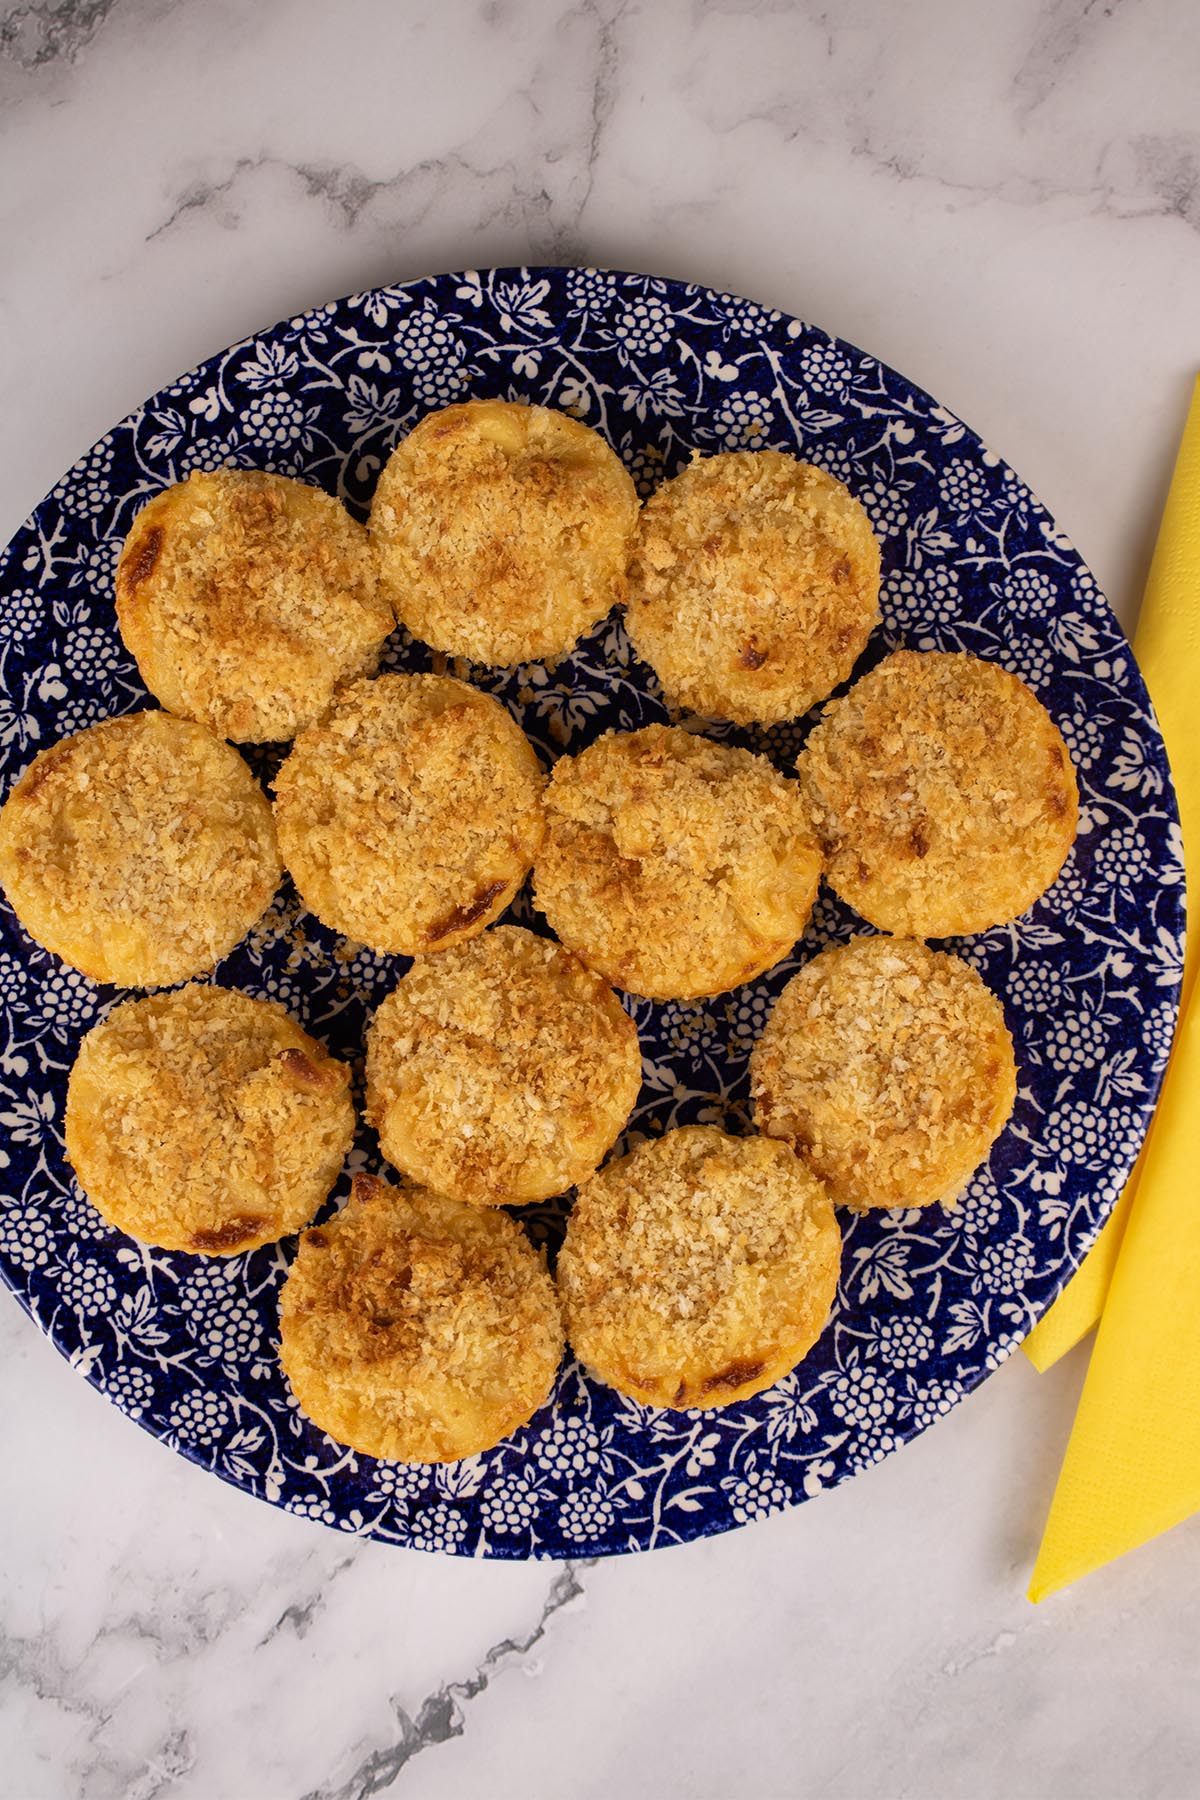 Mac and cheese muffins on blue dinner plate with white berry pattern